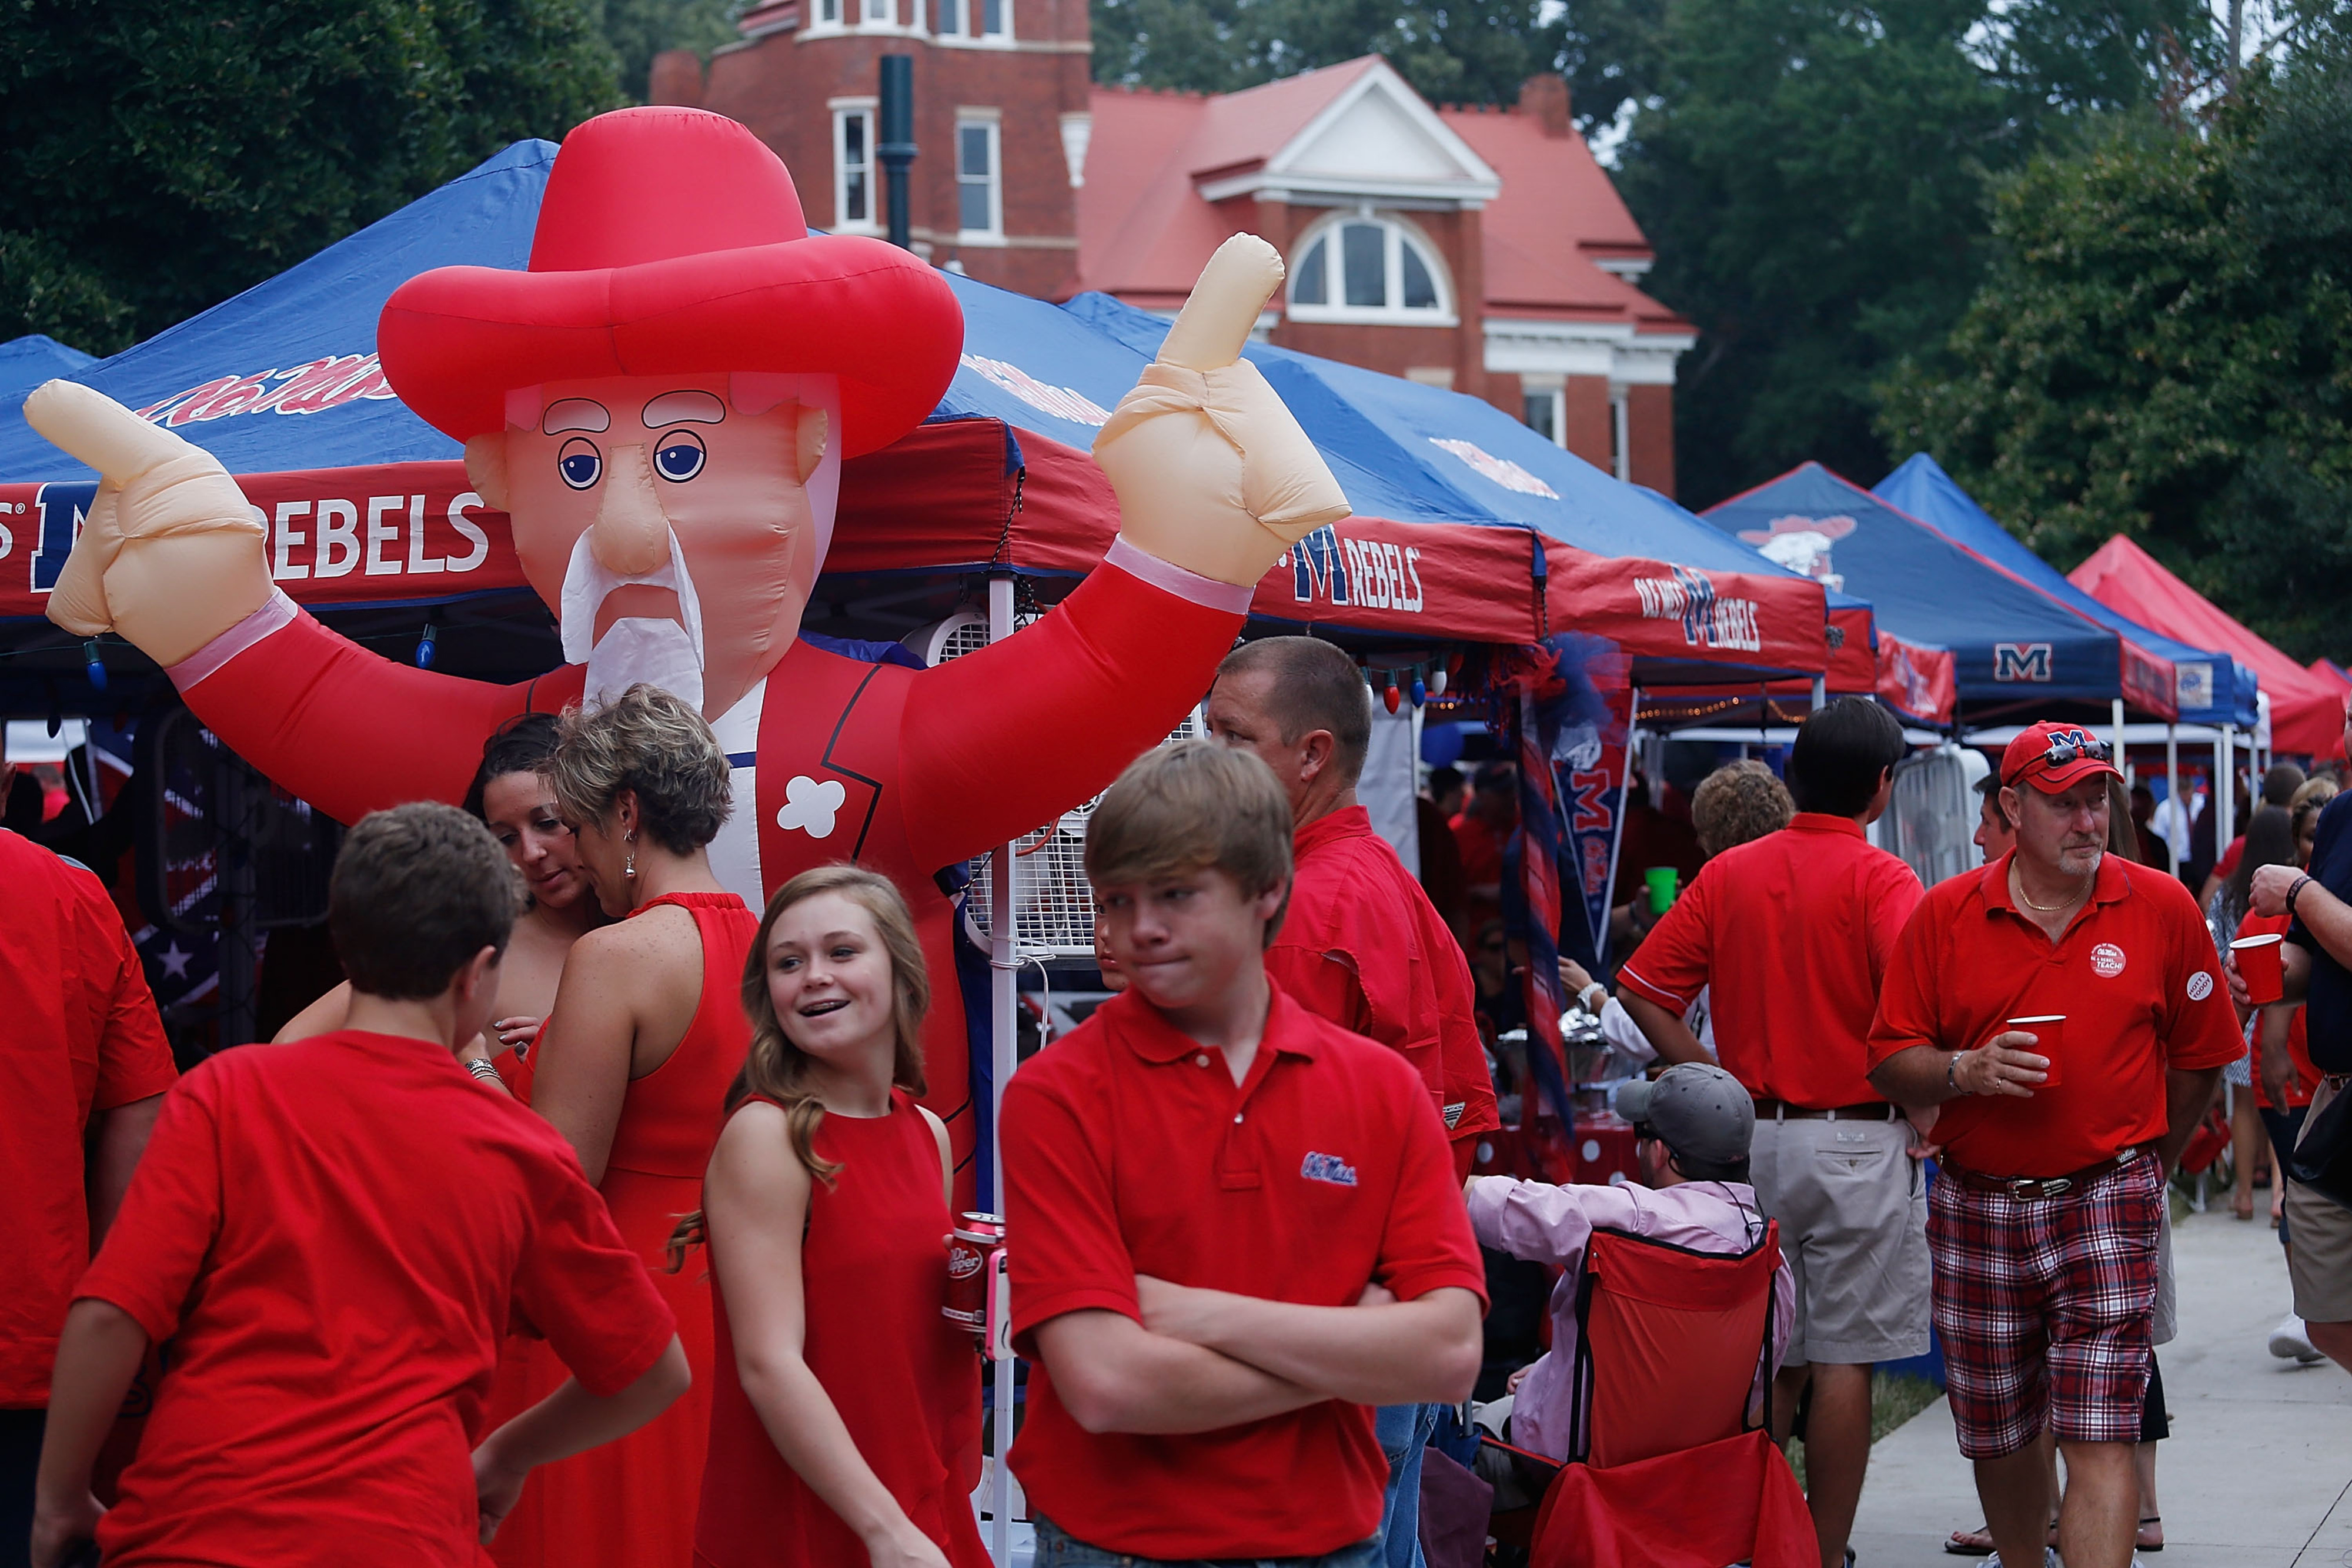 OXFORD, MS - SEPTEMBER 15:  Ole Miss Rebels fans gather at The Grove prior to the start of their game with the Texas Longhorns at Vaught-Hemingway Stadium on September 15, 2012 in Oxford, Mississippi.  (Photo by Scott Halleran/Getty Images)